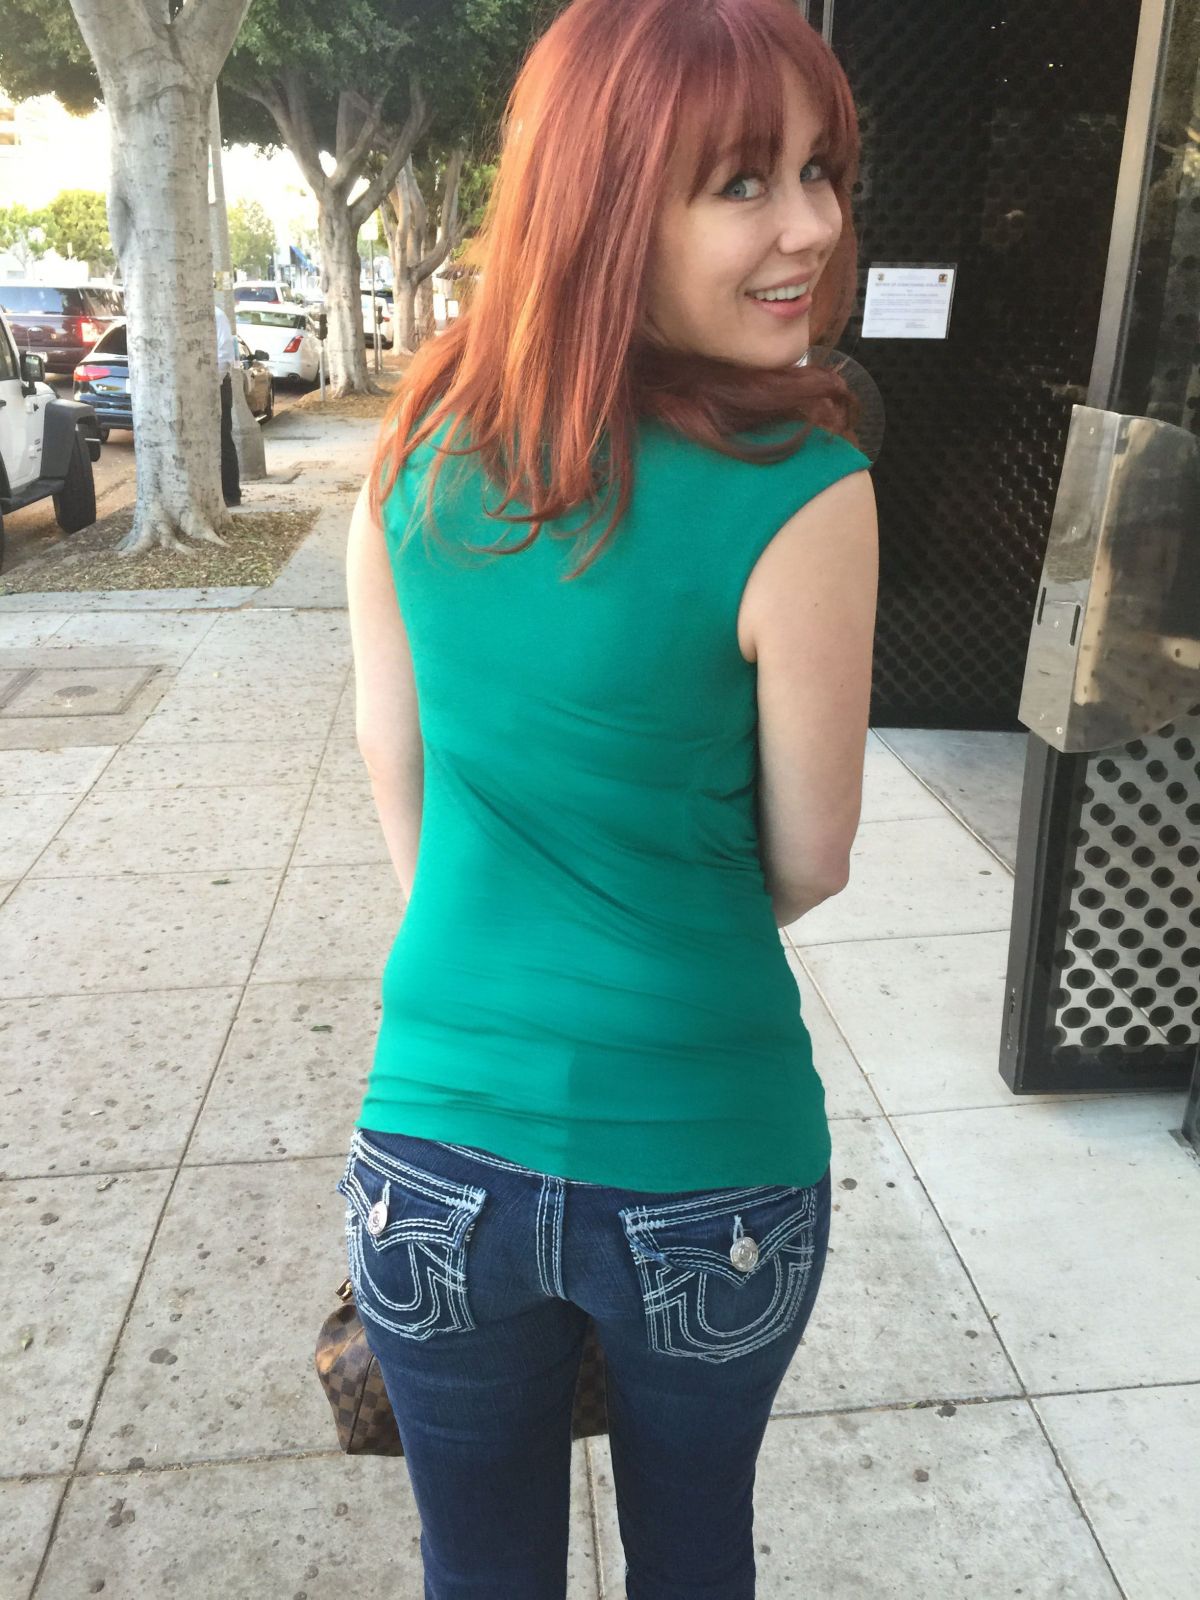 maitland-ward-out-shopping-in-los-angeles-11-17-2015_2.jpg